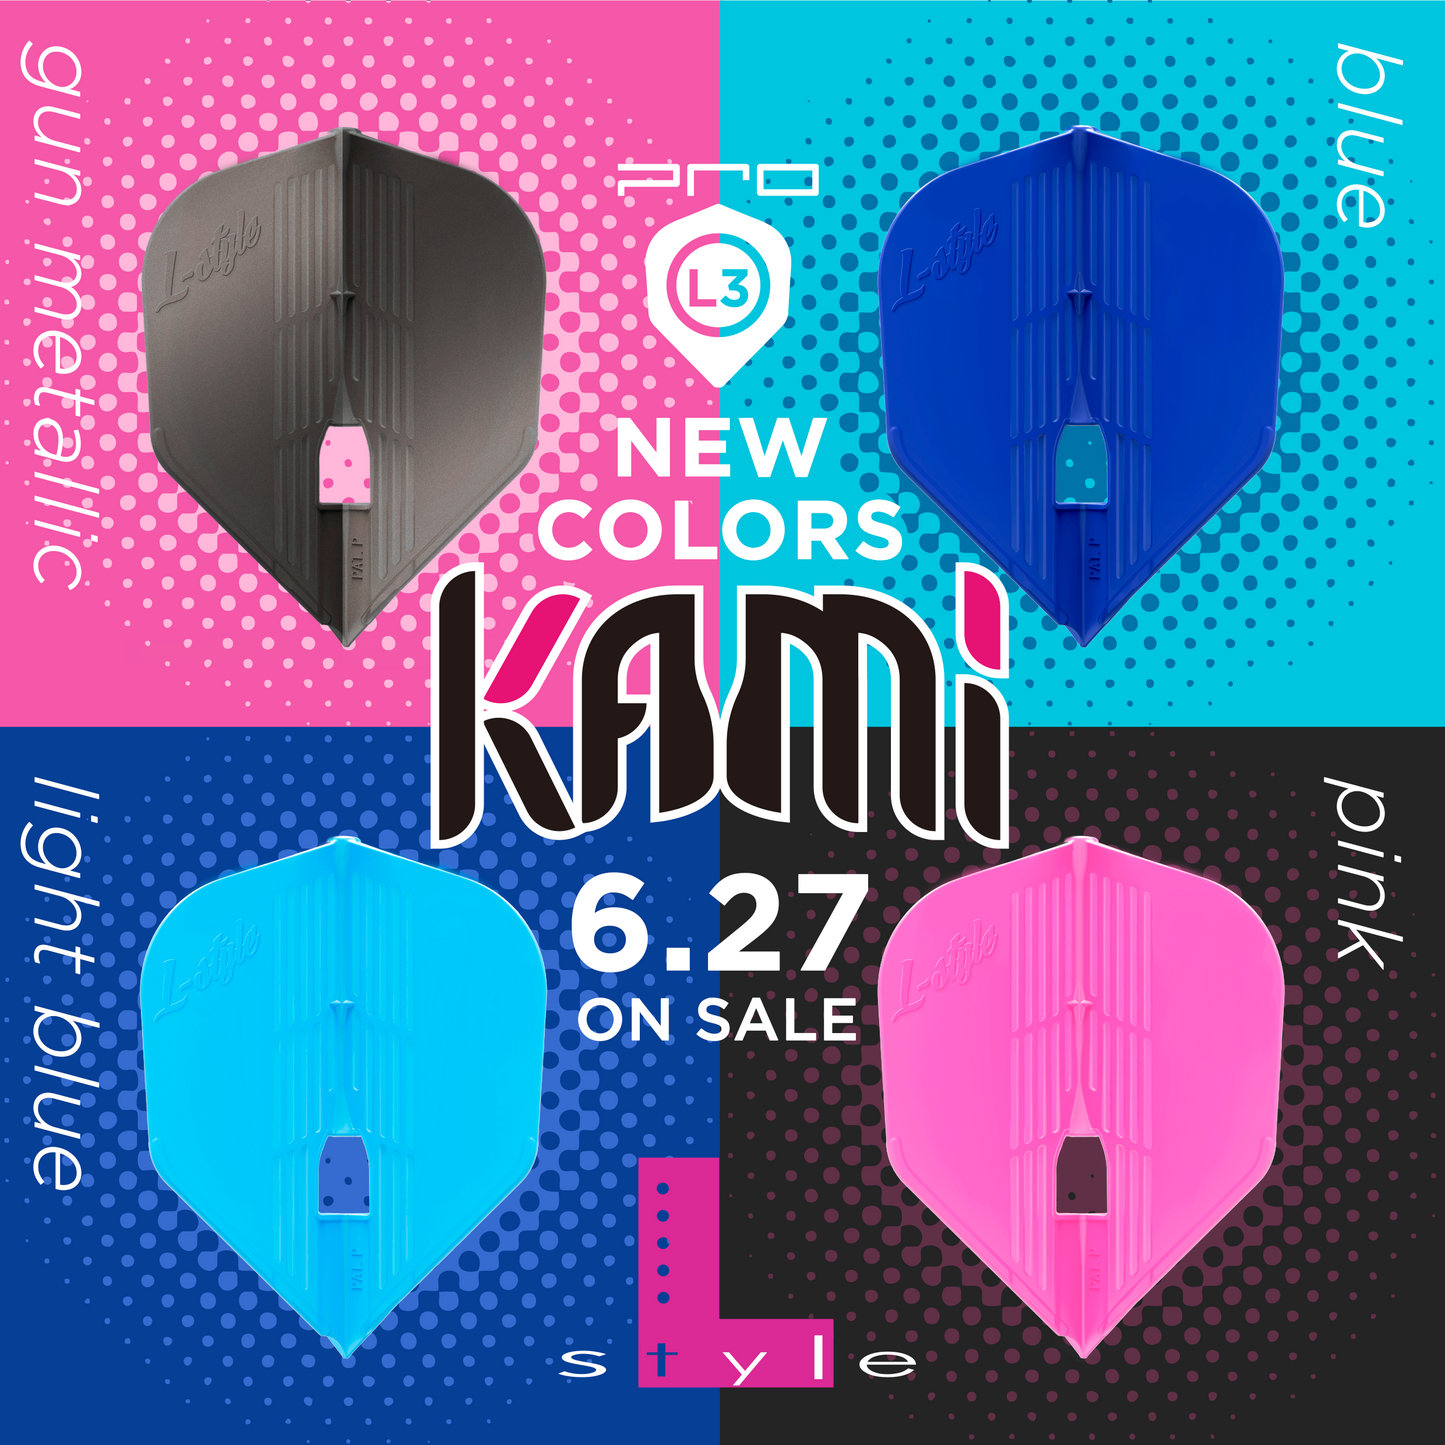 LSTYLE - KAMI Flights - L3 PRO SHAPE - (Champagne Ring not included)